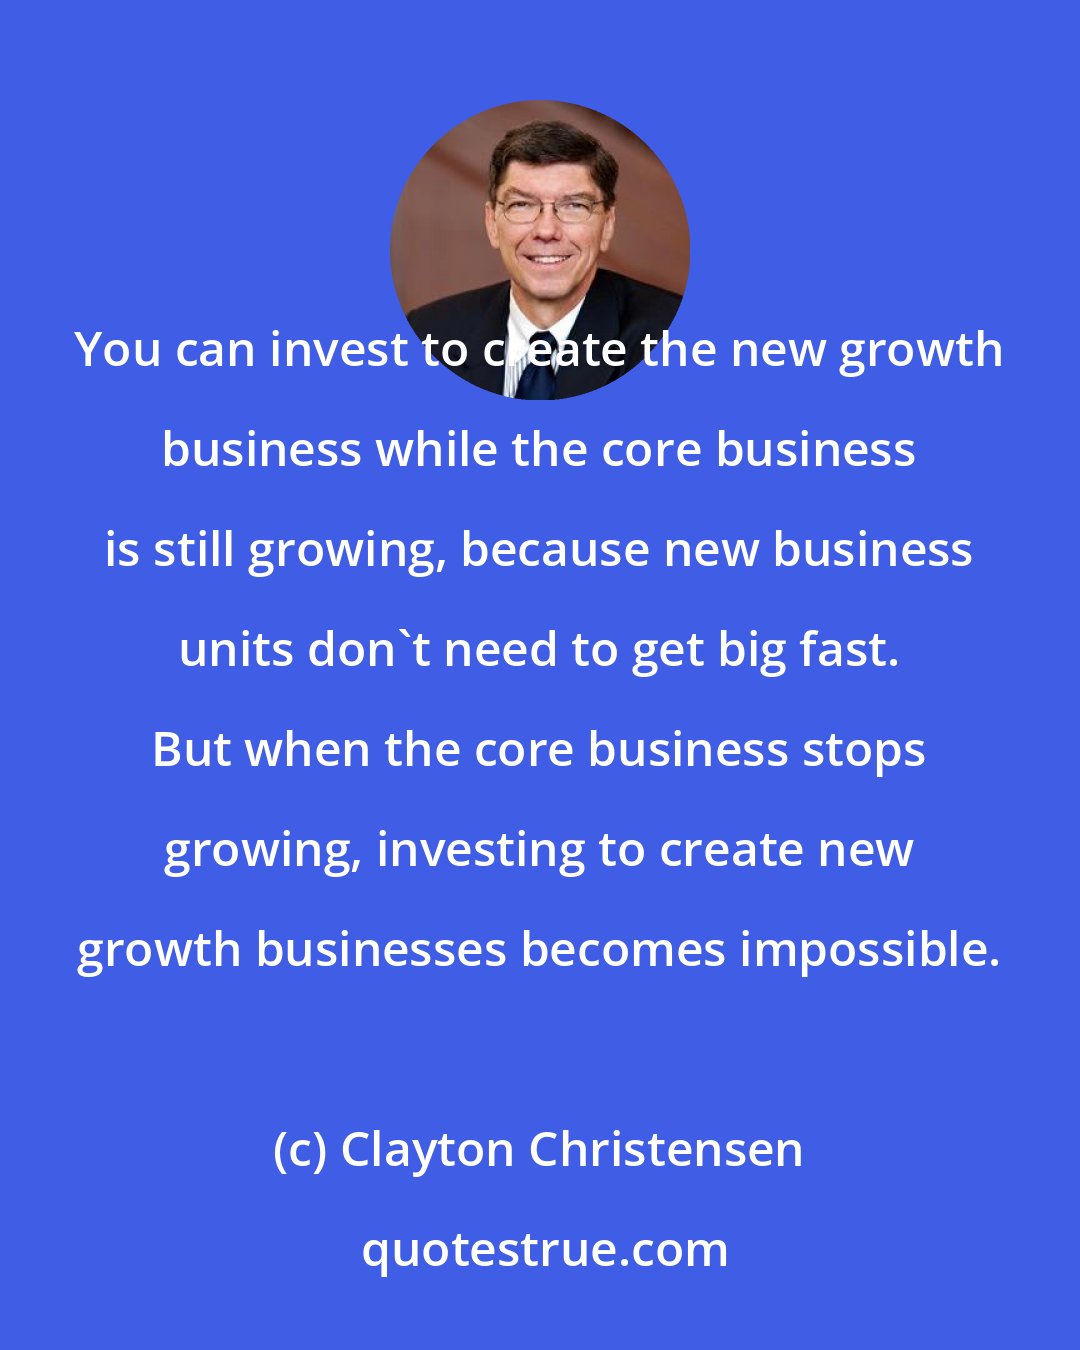 Clayton Christensen: You can invest to create the new growth business while the core business is still growing, because new business units don't need to get big fast. But when the core business stops growing, investing to create new growth businesses becomes impossible.